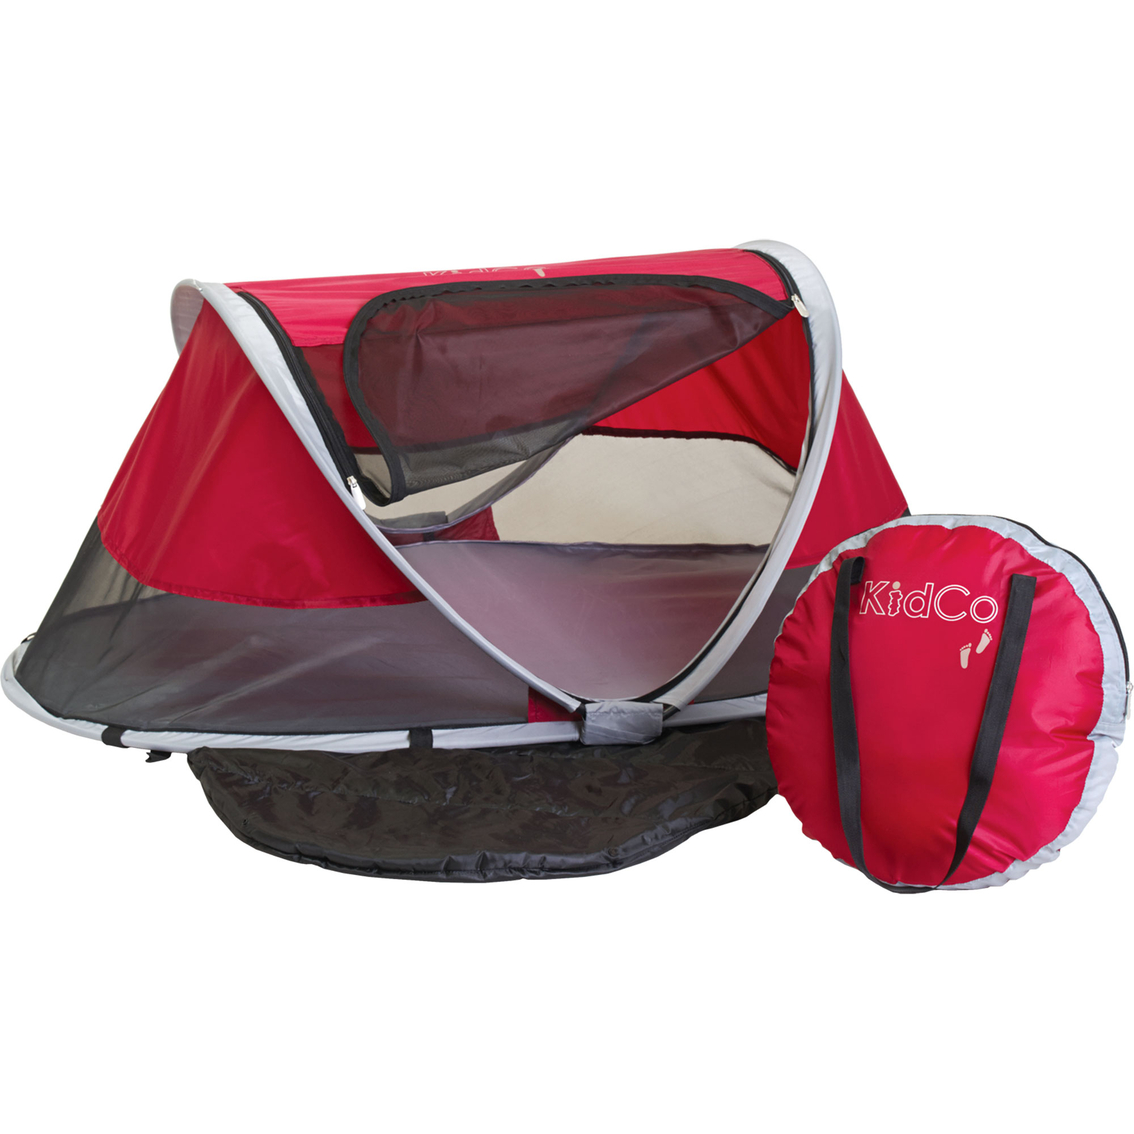 Kidco Pea Pod Travel Bed - Image 1 of 2